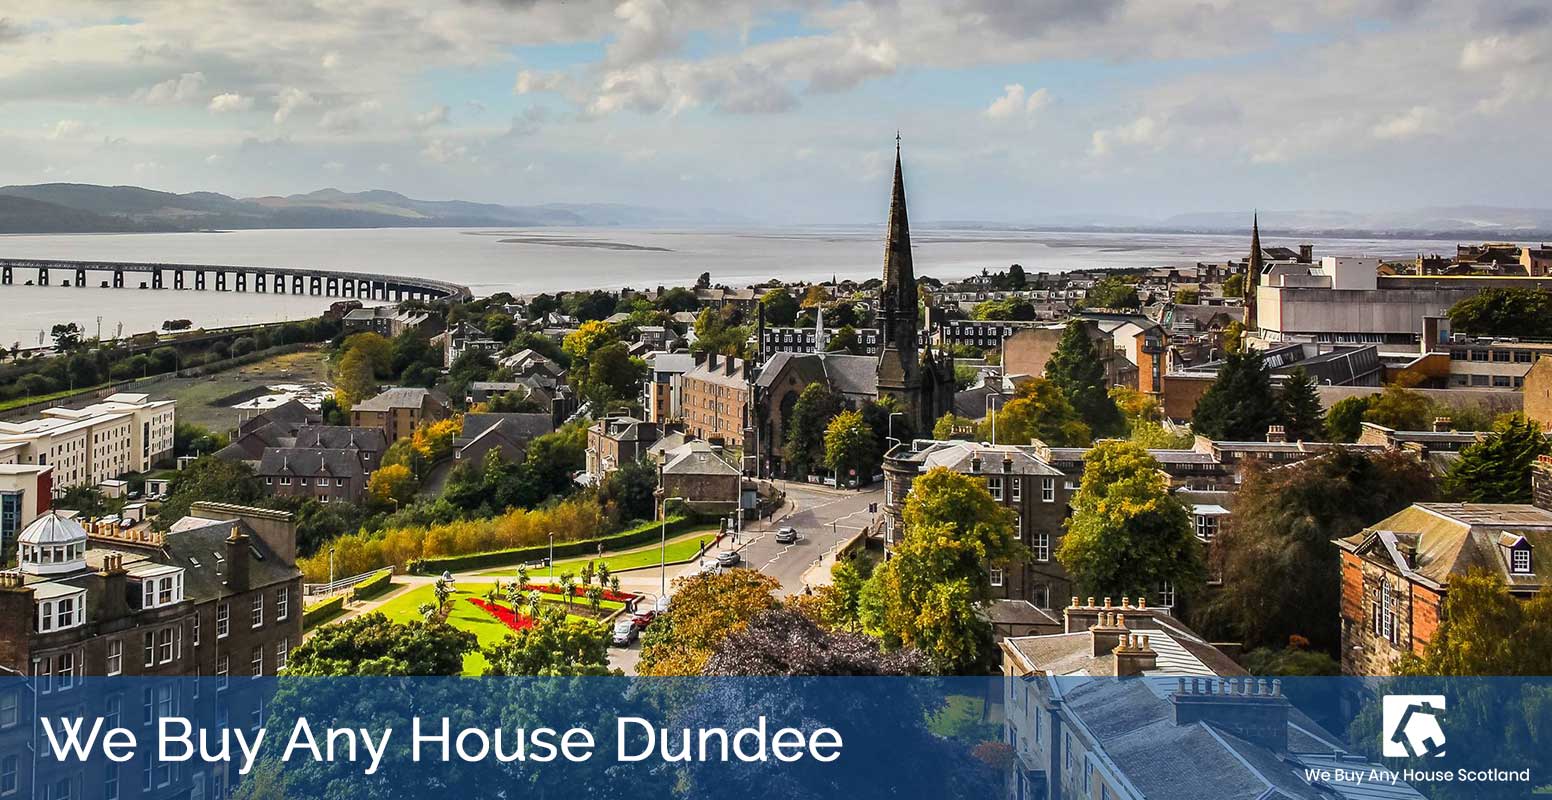 We Buy Any House Dundee